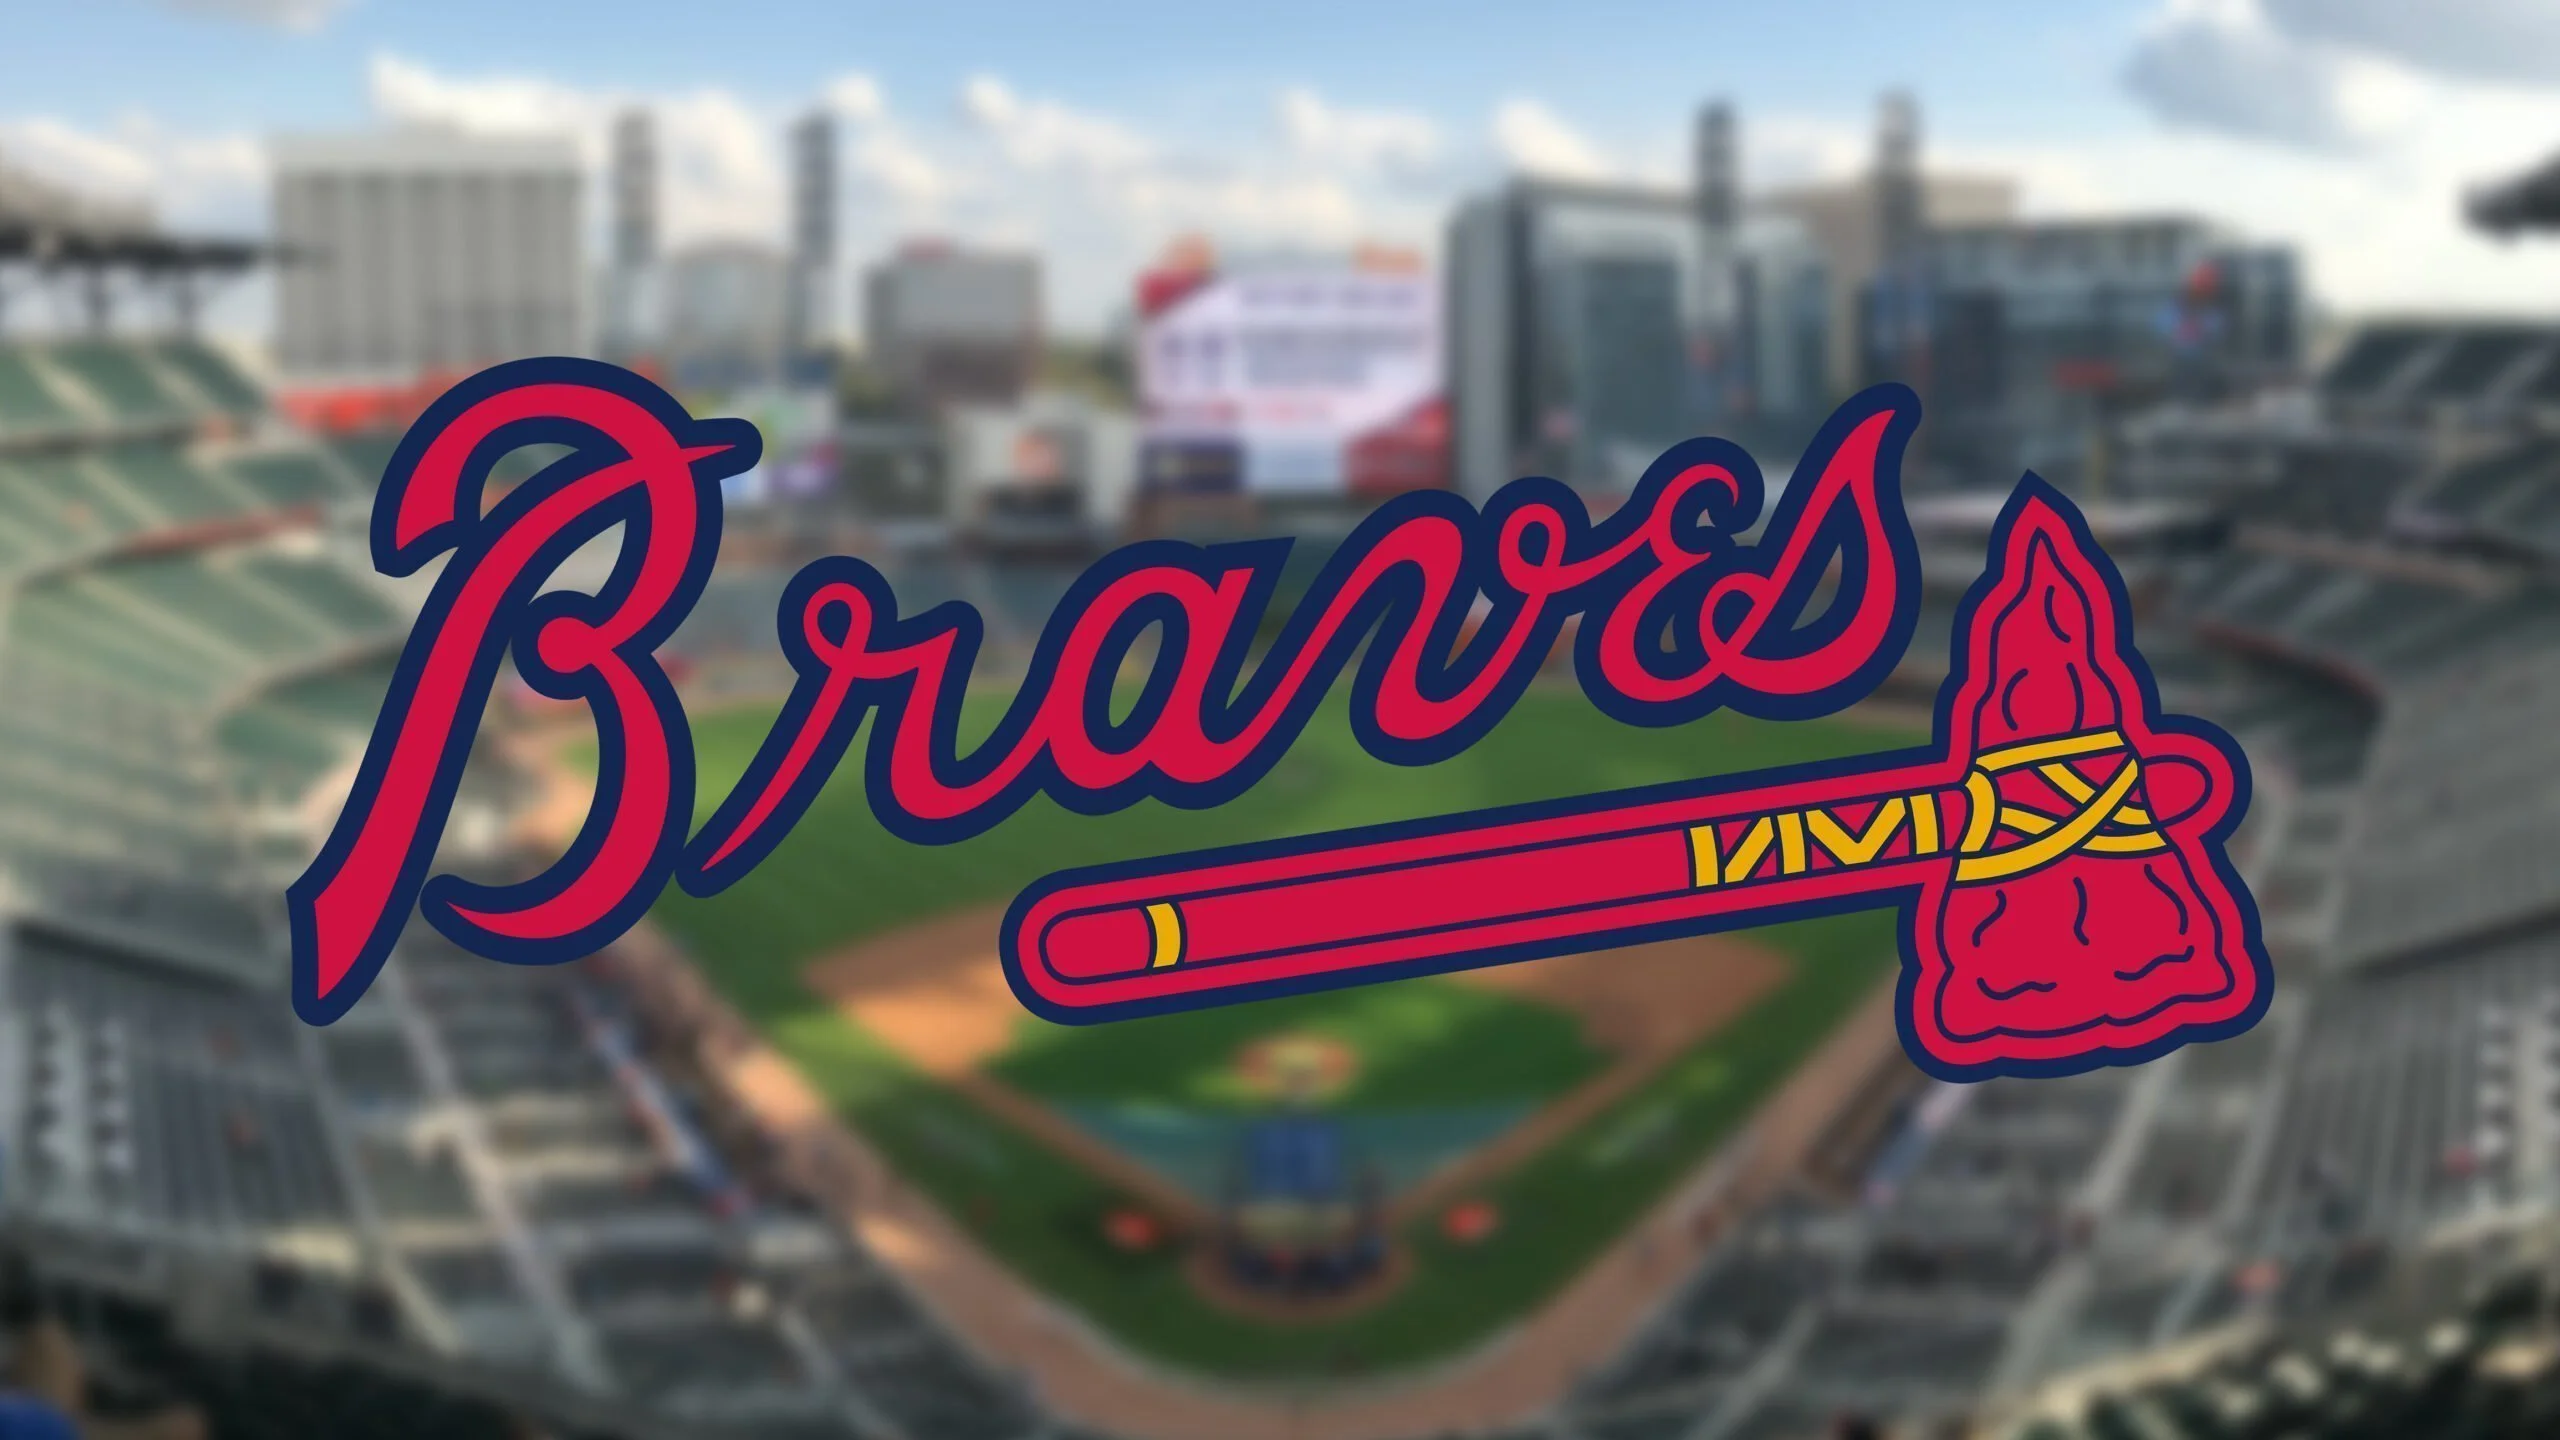 Atlanta Braves HD Wallpapers and Backgrounds